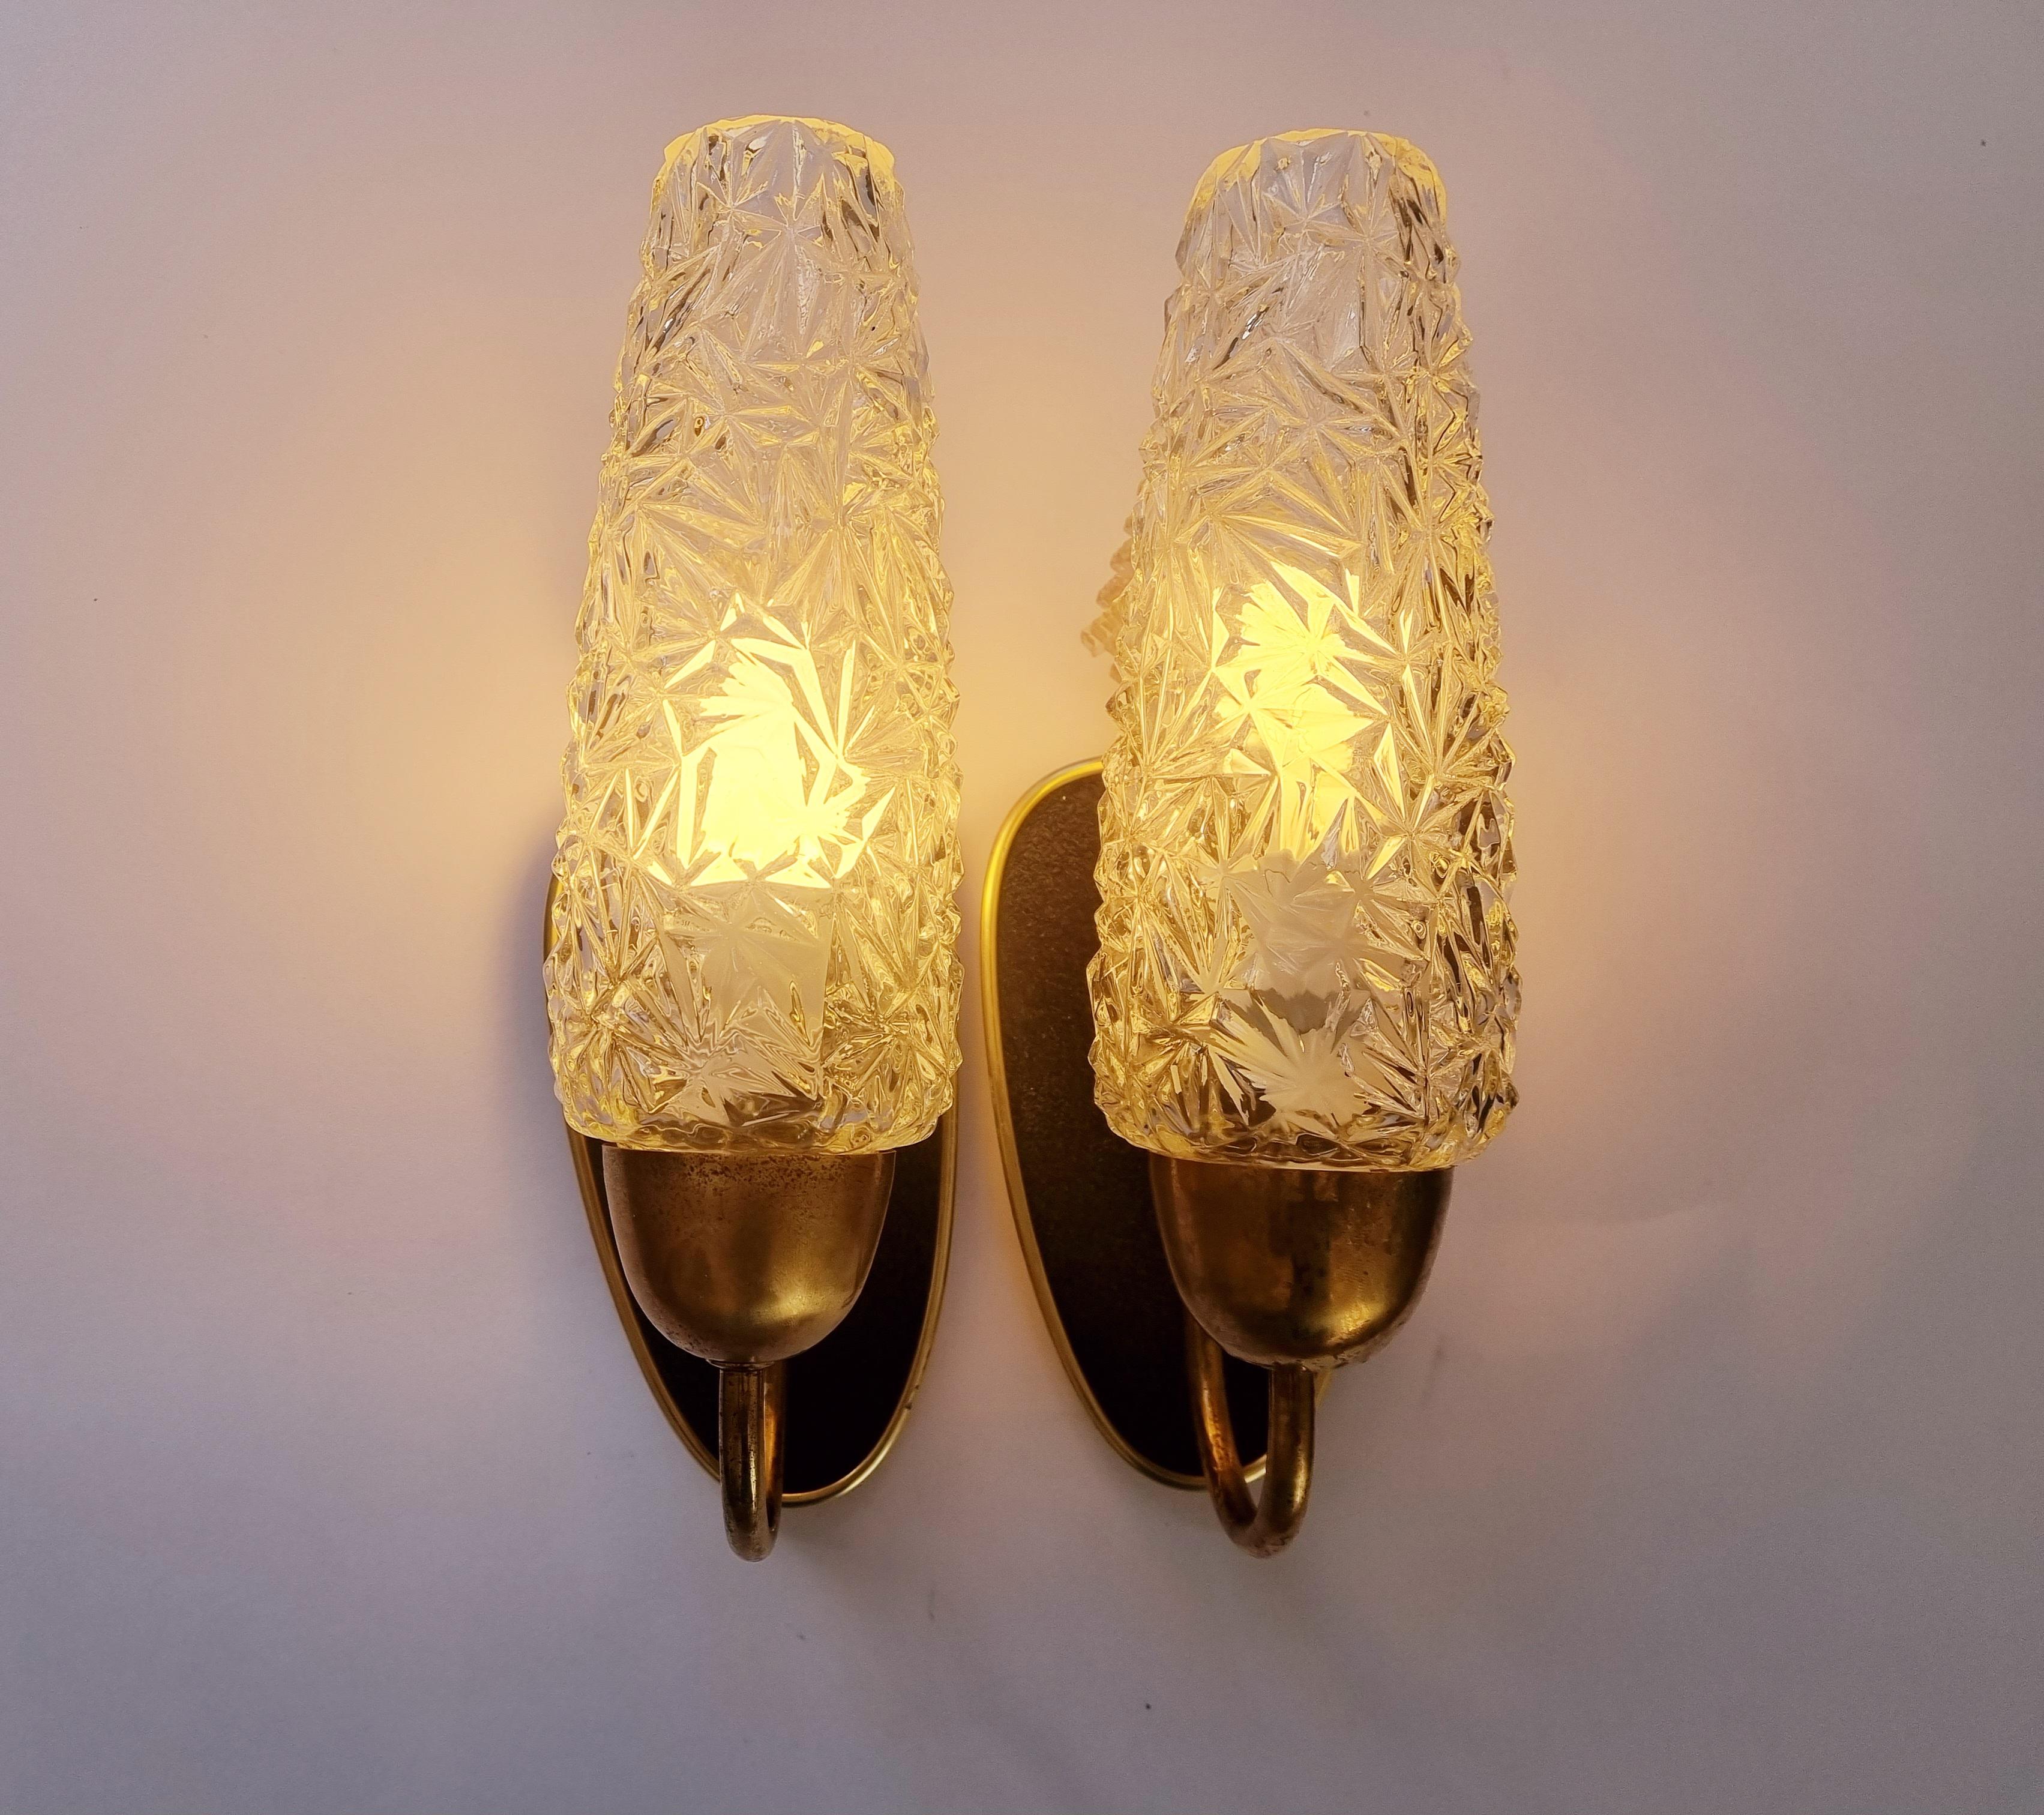 Pair of Rare Midcentury Wall Lamps, Germany, 1960s For Sale 10